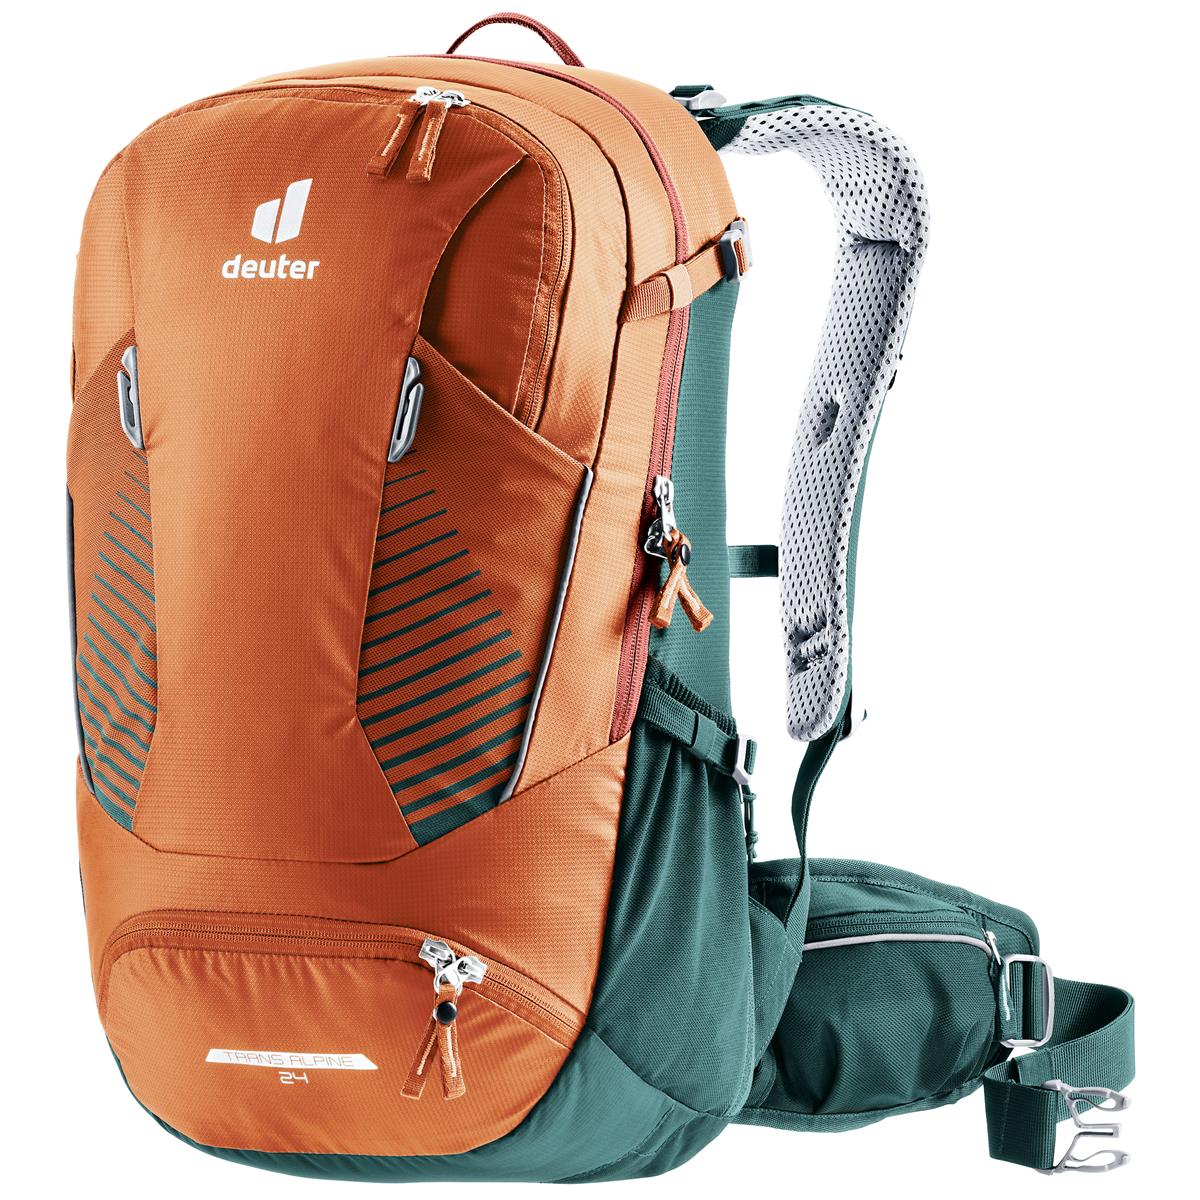 Deuter MTB Backpack with Hydration System Compartment Trans Alpine 24 24L - Chestnut Deepsea